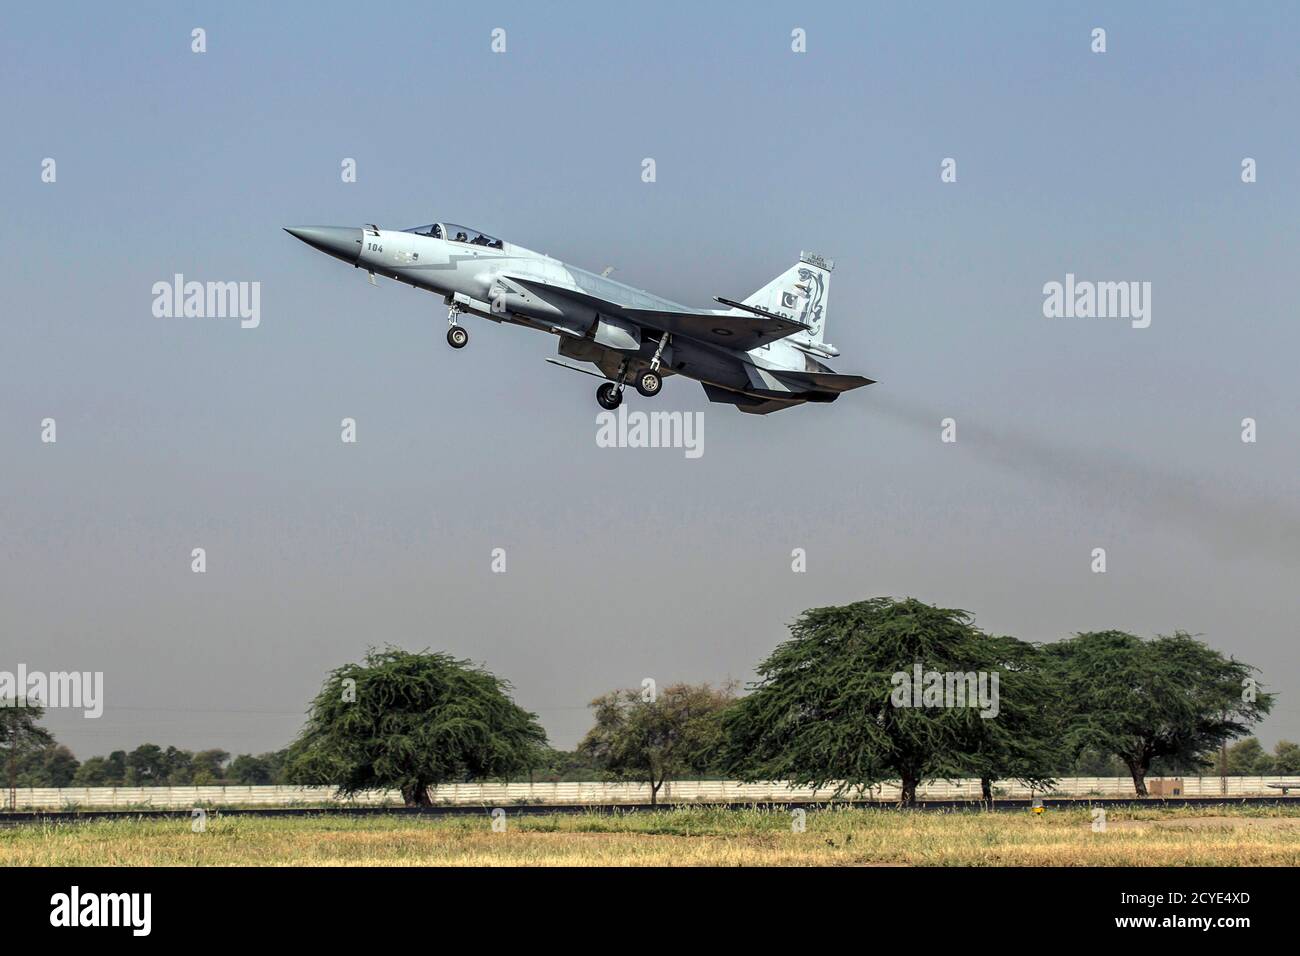 A JF-17 Thunder fighter jet of the Pakistan Air Force takes off from Mushaf base in Sargodha, north Pakistan June 7, 2013. The plane is co-developed by the Aviation Industry Corp of China and the Pakistan Aeronautical Complex, according to local media. Picture taken June 7, 2013. REUTERS/Zohra Bensemra (PAKISTAN - Tags: MILITARY) Stock Photo